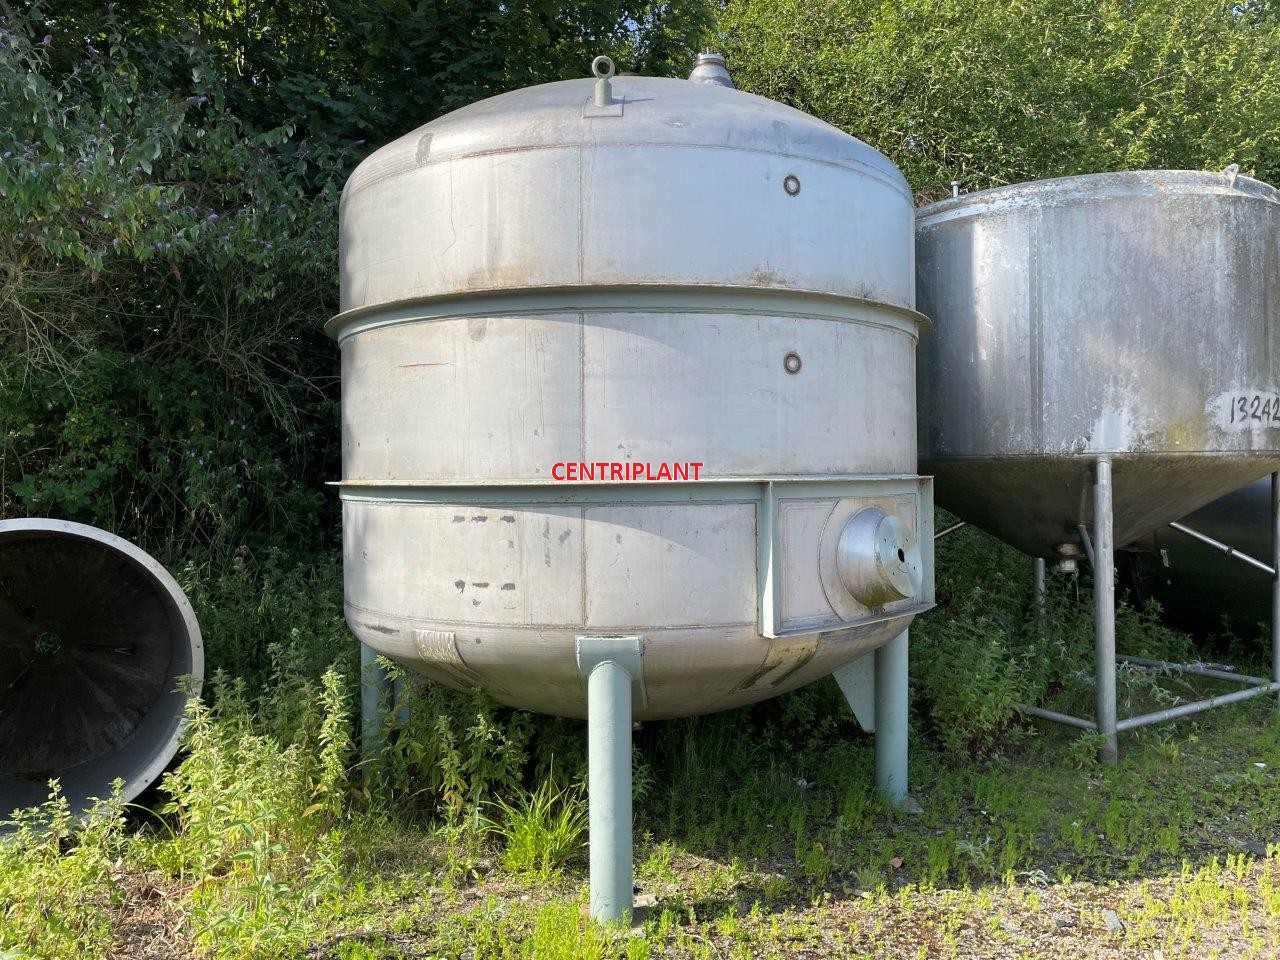 13681 - 12,000 LITRE VERTICAL STAINLESS STEEL TANK, DISHED ENDS, TANK STANDING ON THREE LEGS